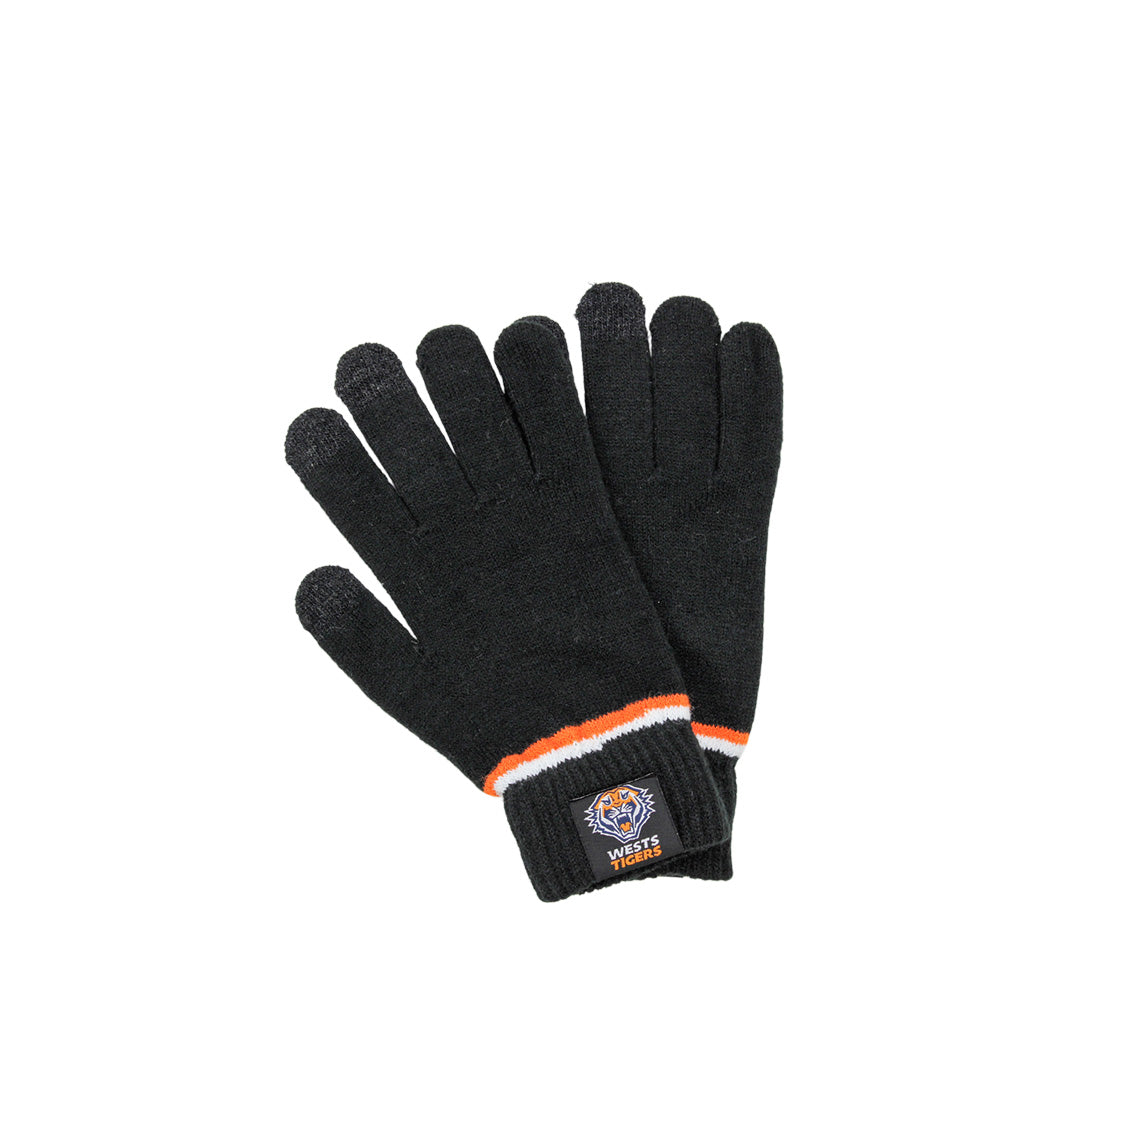 WESTS TIGERS NRL TOUCHSCREEN GLOVES_WESTS TIGERS_STUBBY CLUB